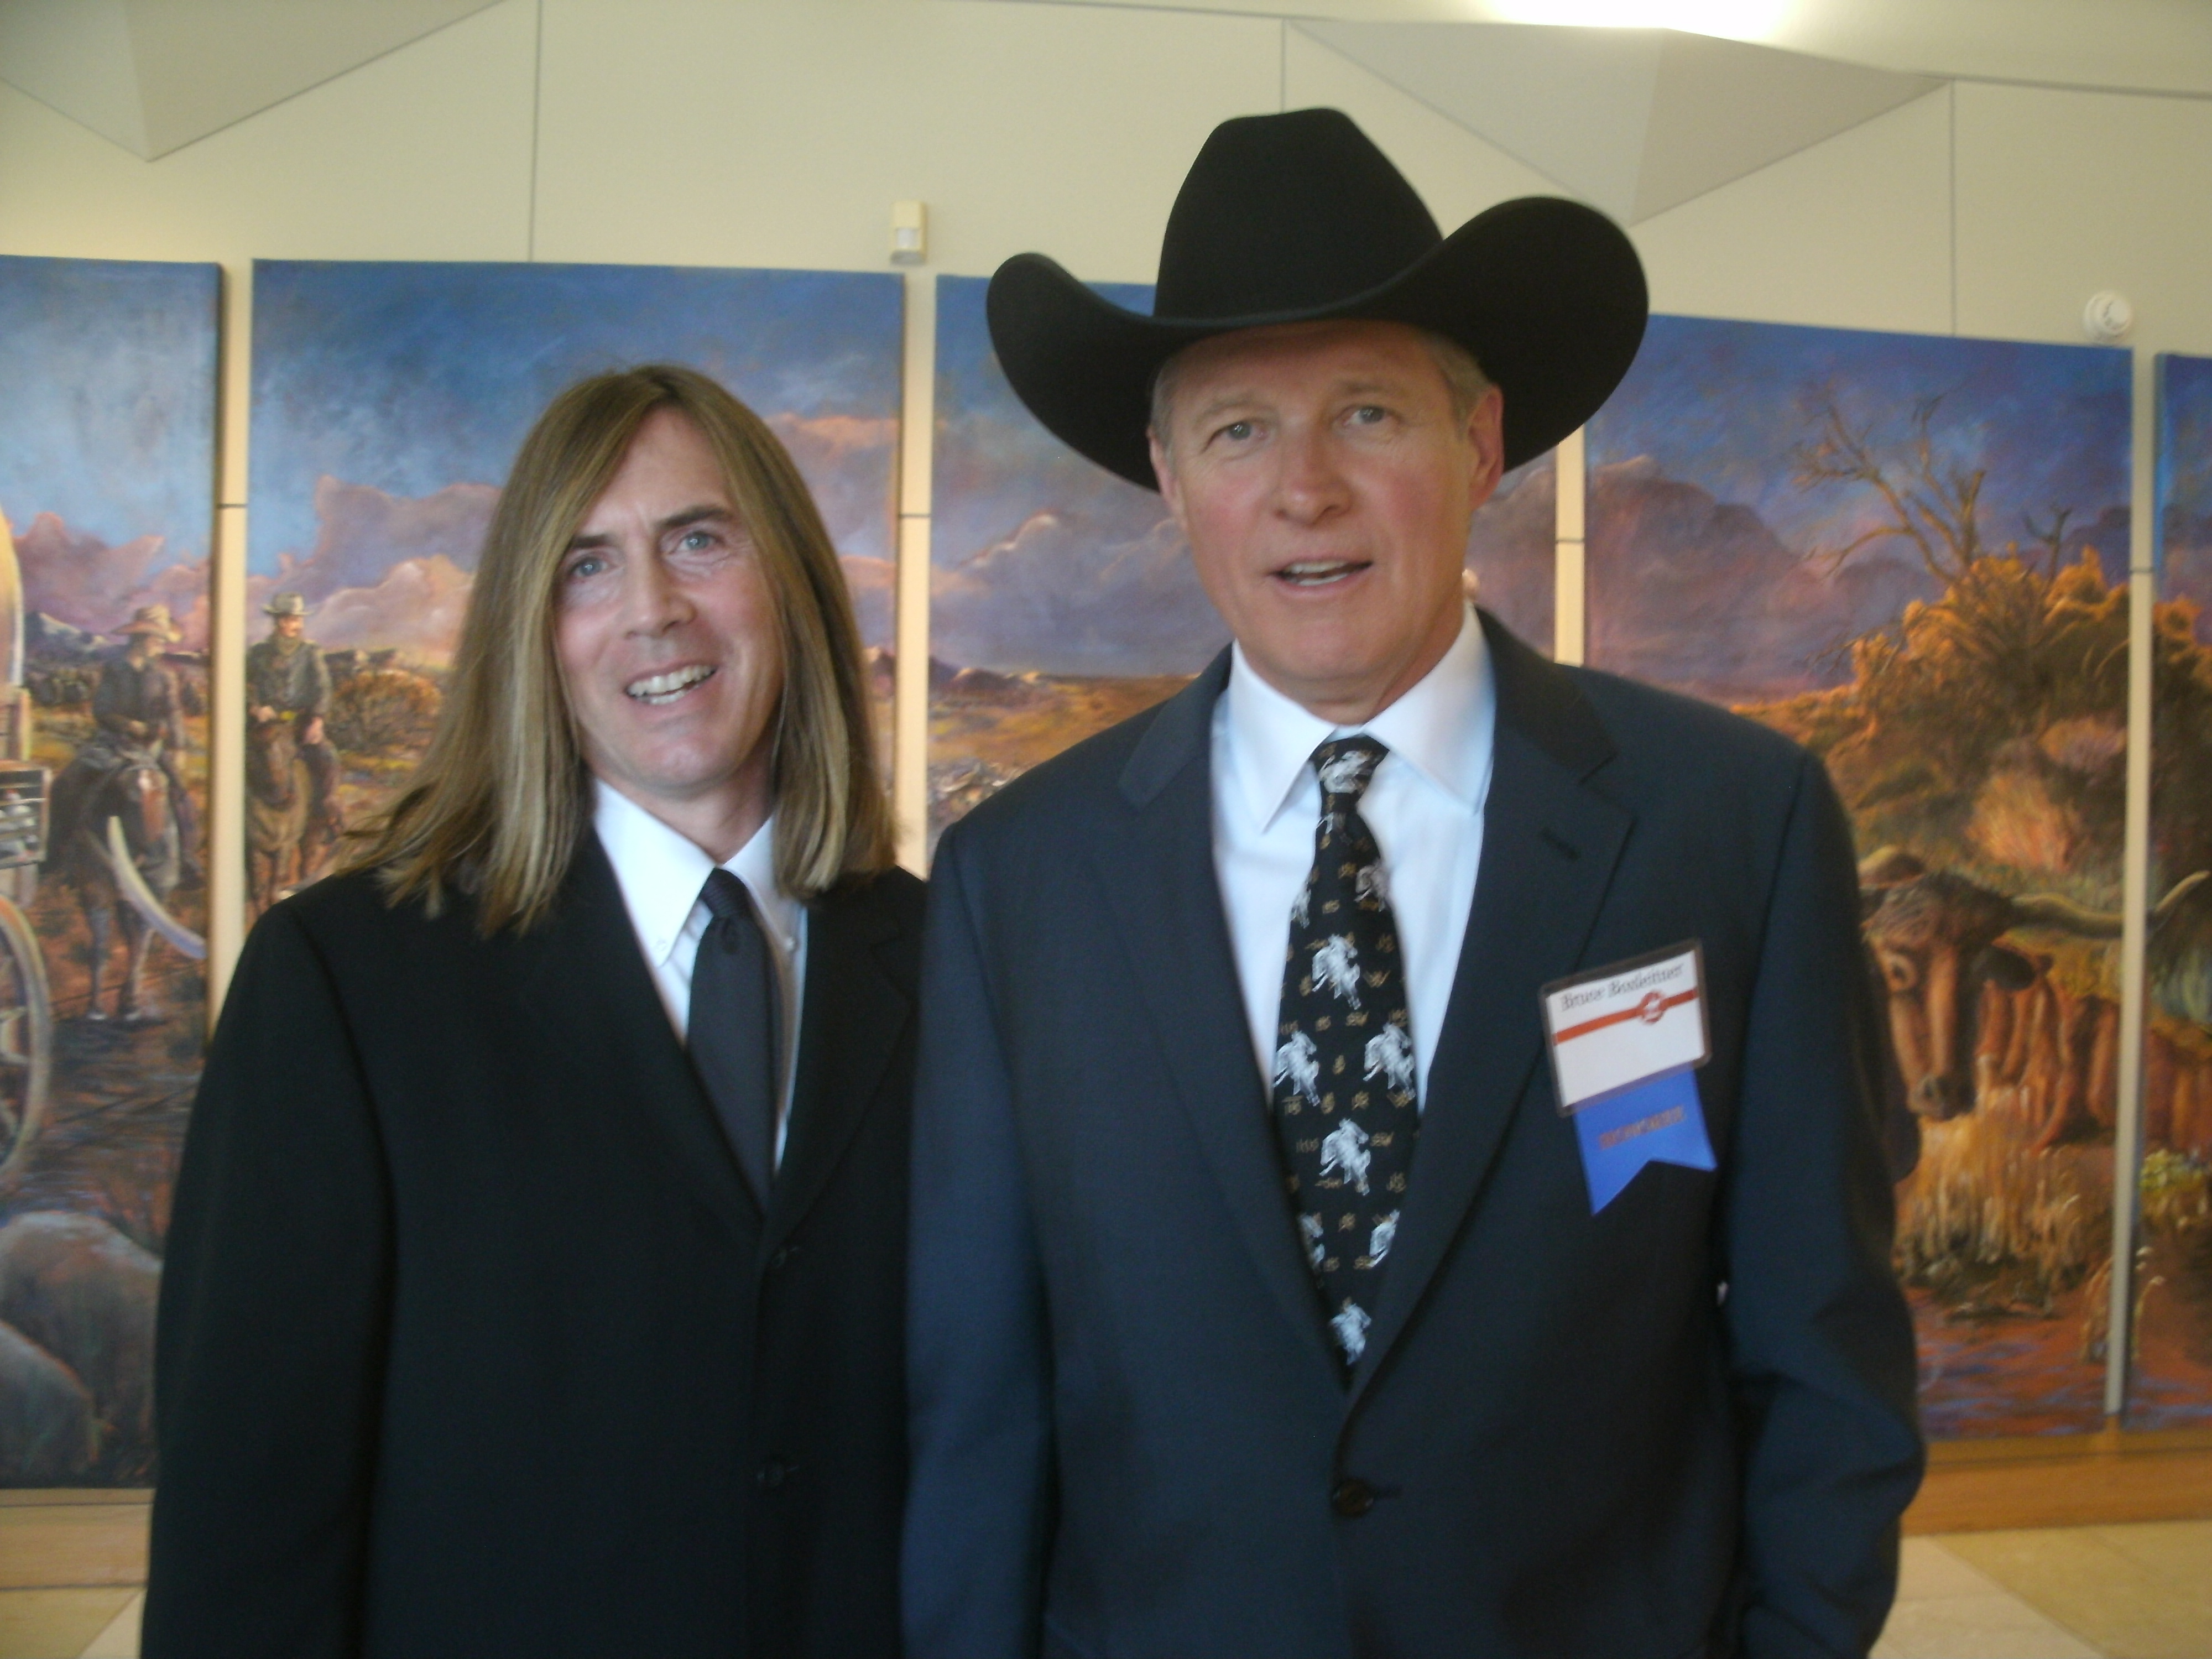 With Bruce Boxleitner at the Cowboy Hall of Fame building, Oklahoma City, Oklahoma.